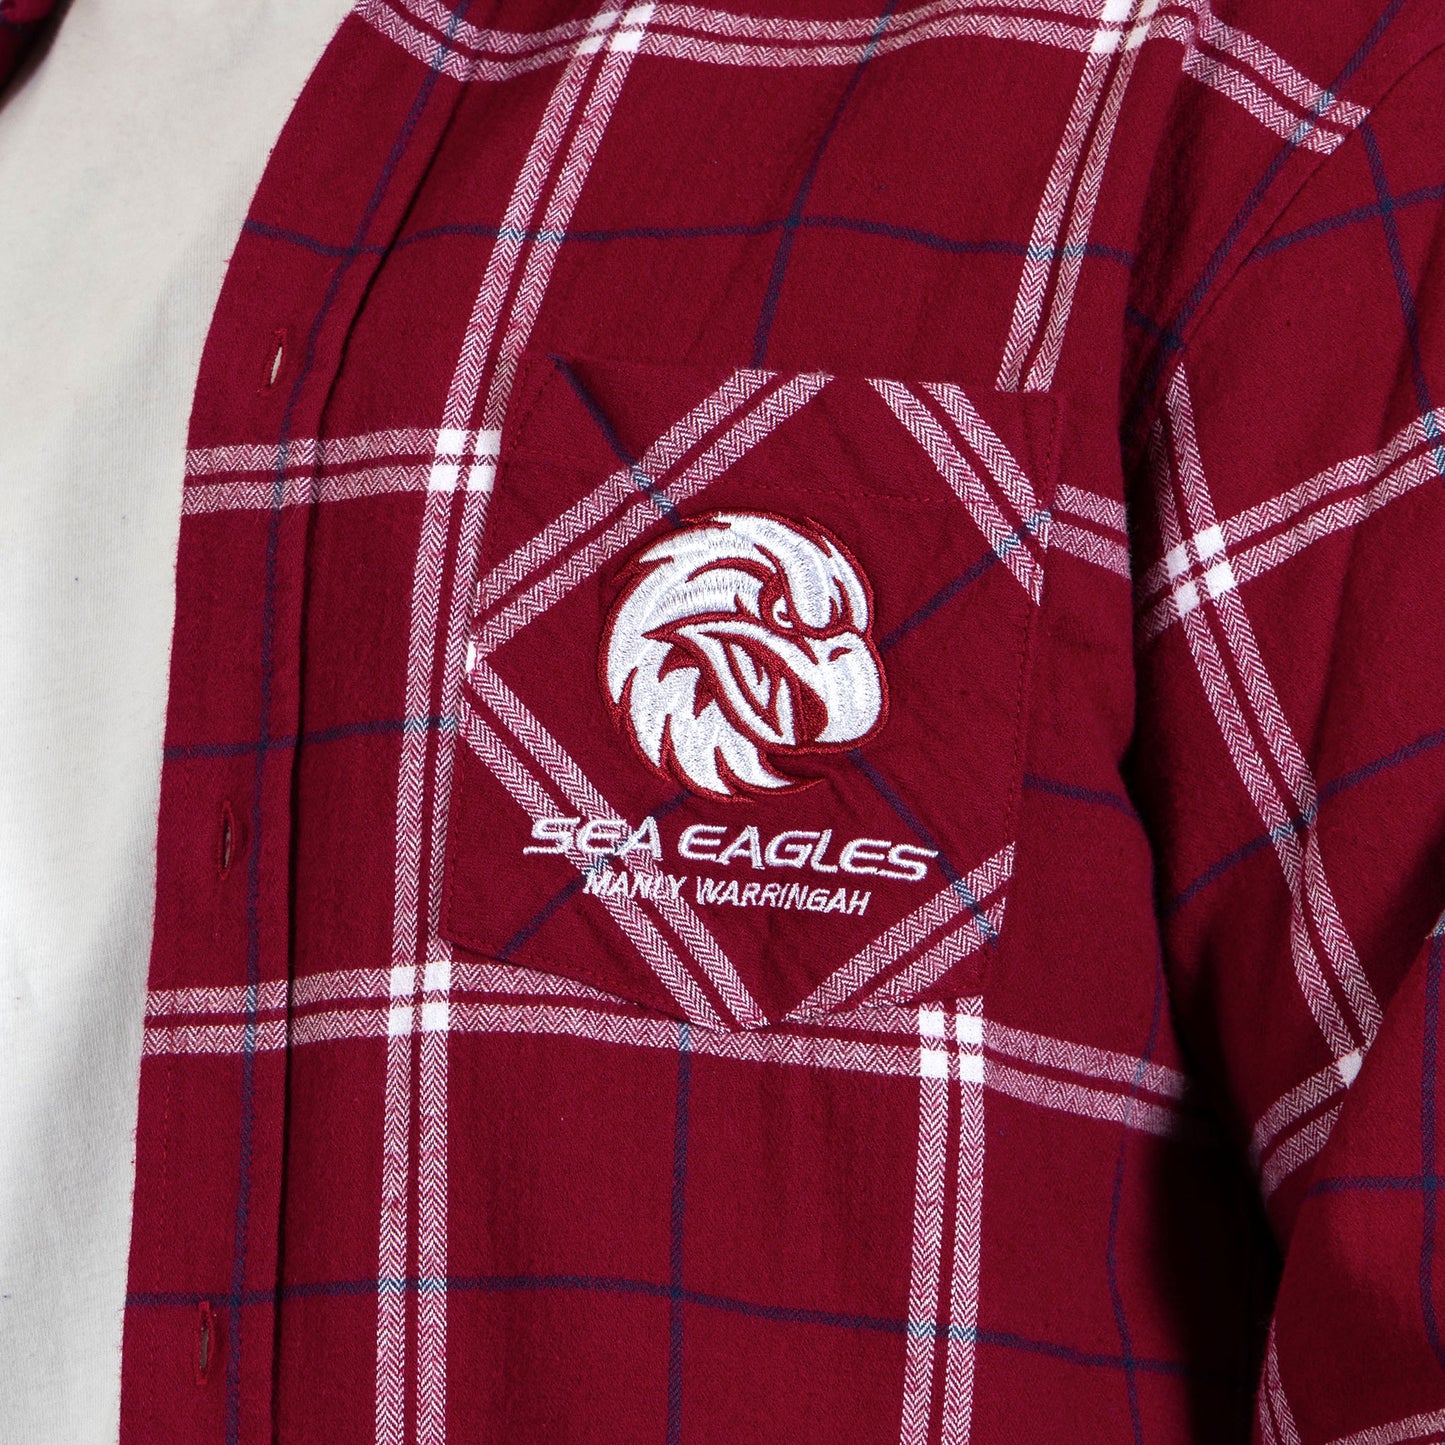 Manly-Warringah Sea Eagles Mustang Flannel Shirts